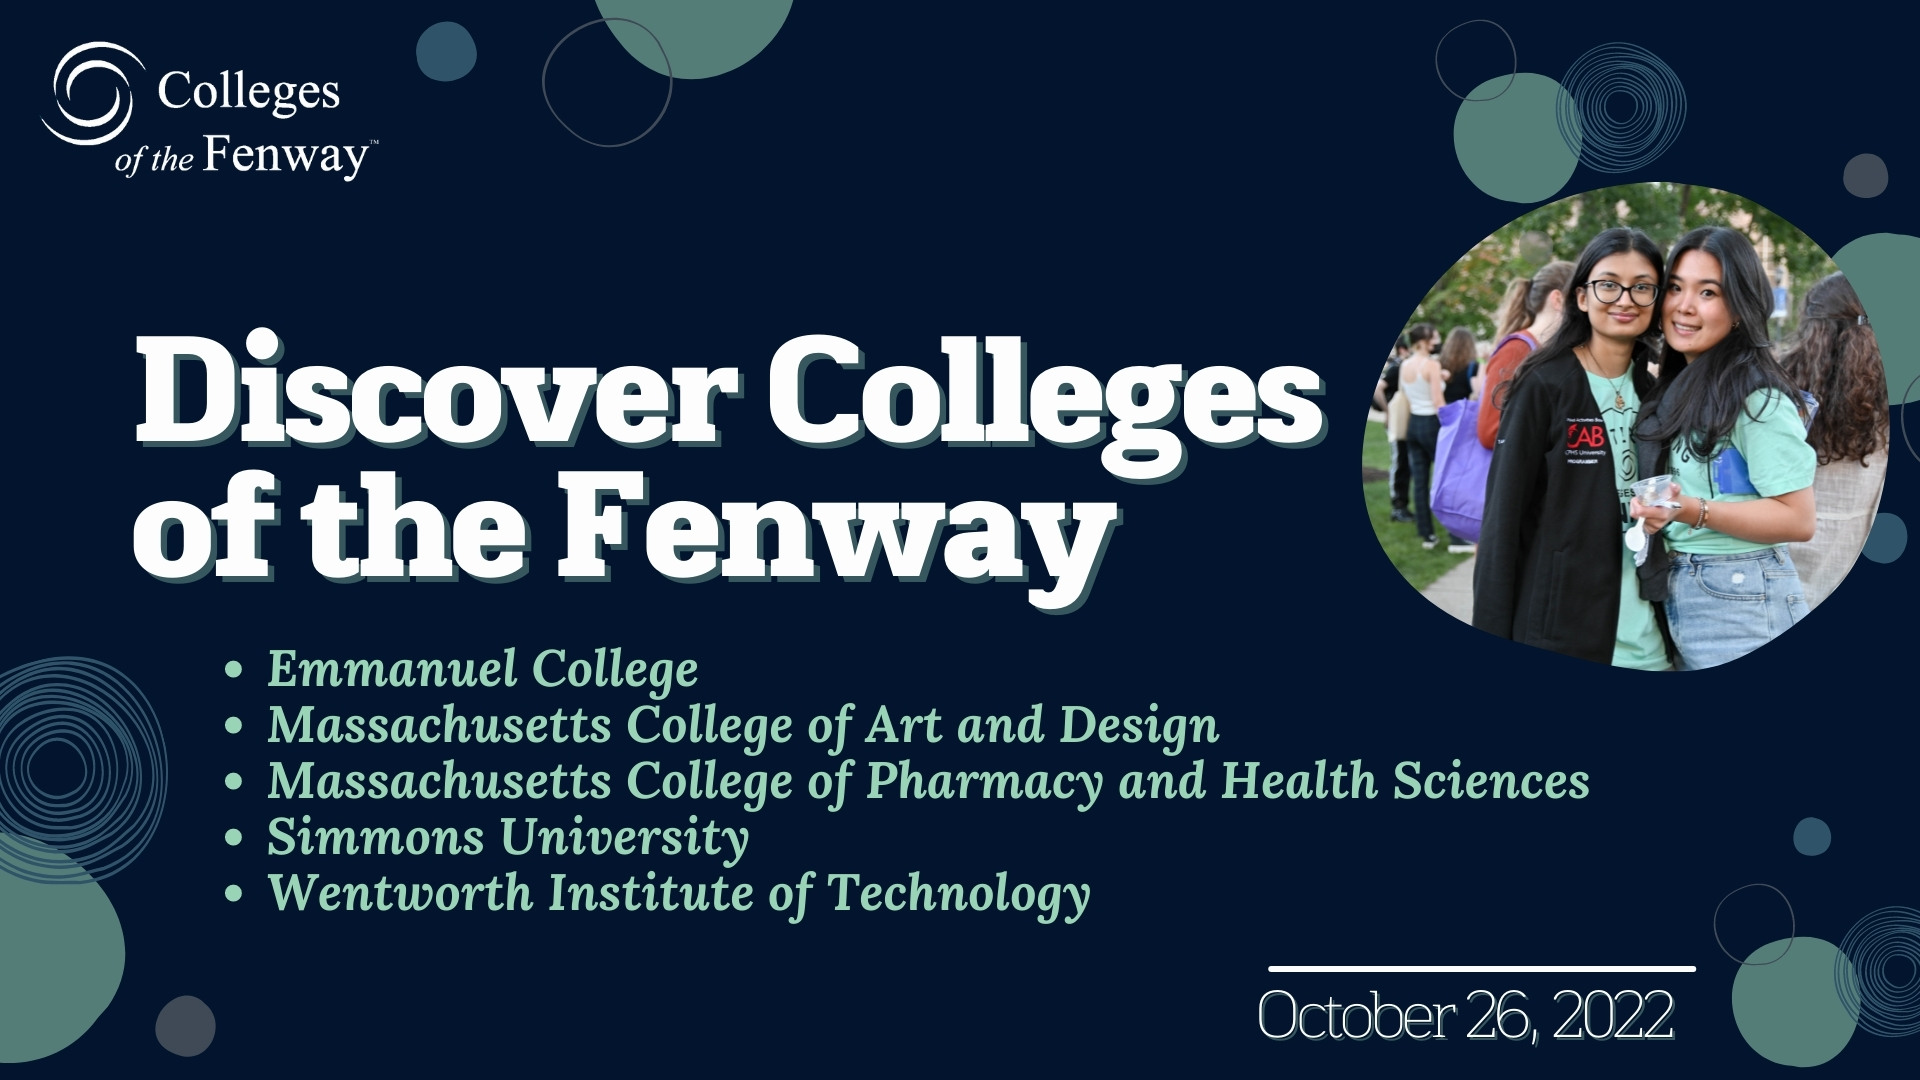 Discover the Colleges of the Fenway